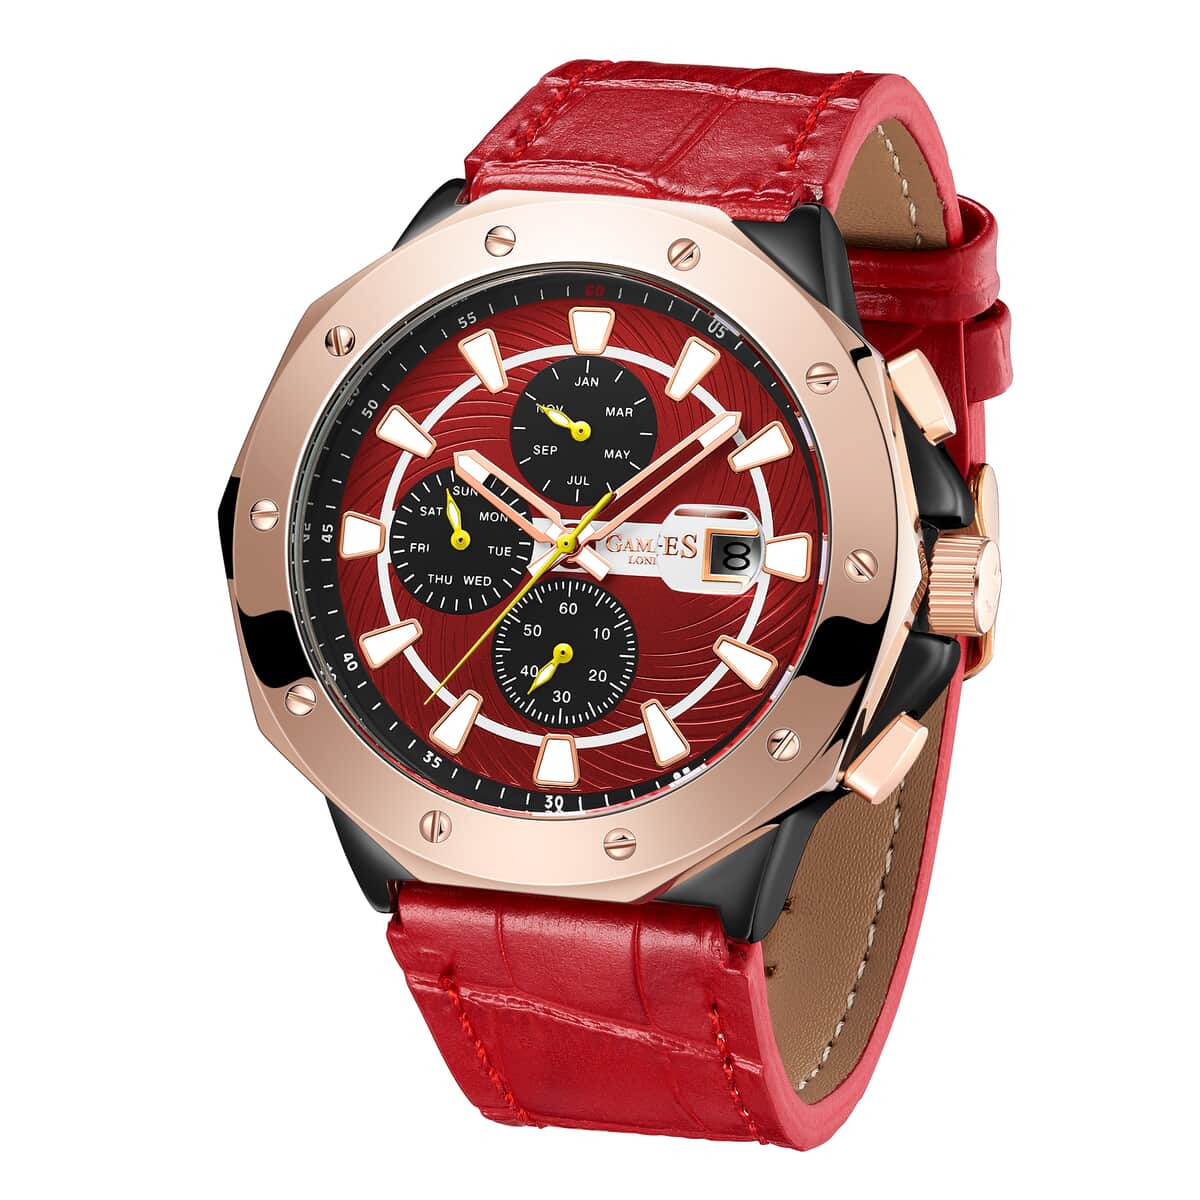 Gamages of London Limited Edition Hand Assembled Military Sports Automatic Movement Red Genuine Leather Strap Watch in RG ION Plating (45mm) image number 2